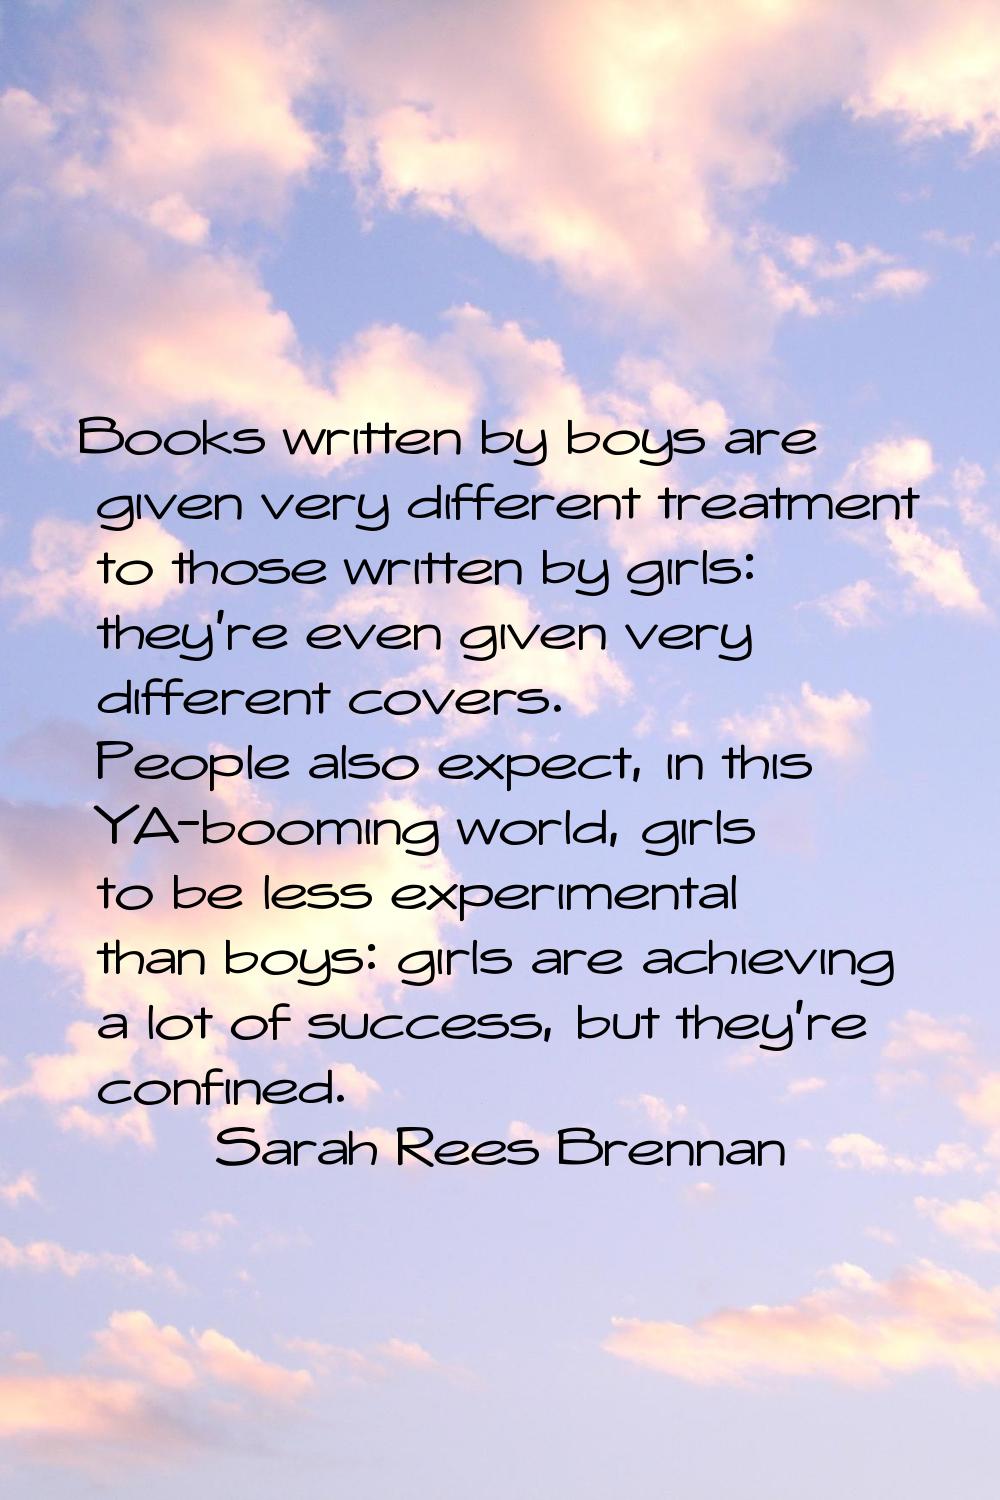 Books written by boys are given very different treatment to those written by girls: they're even gi